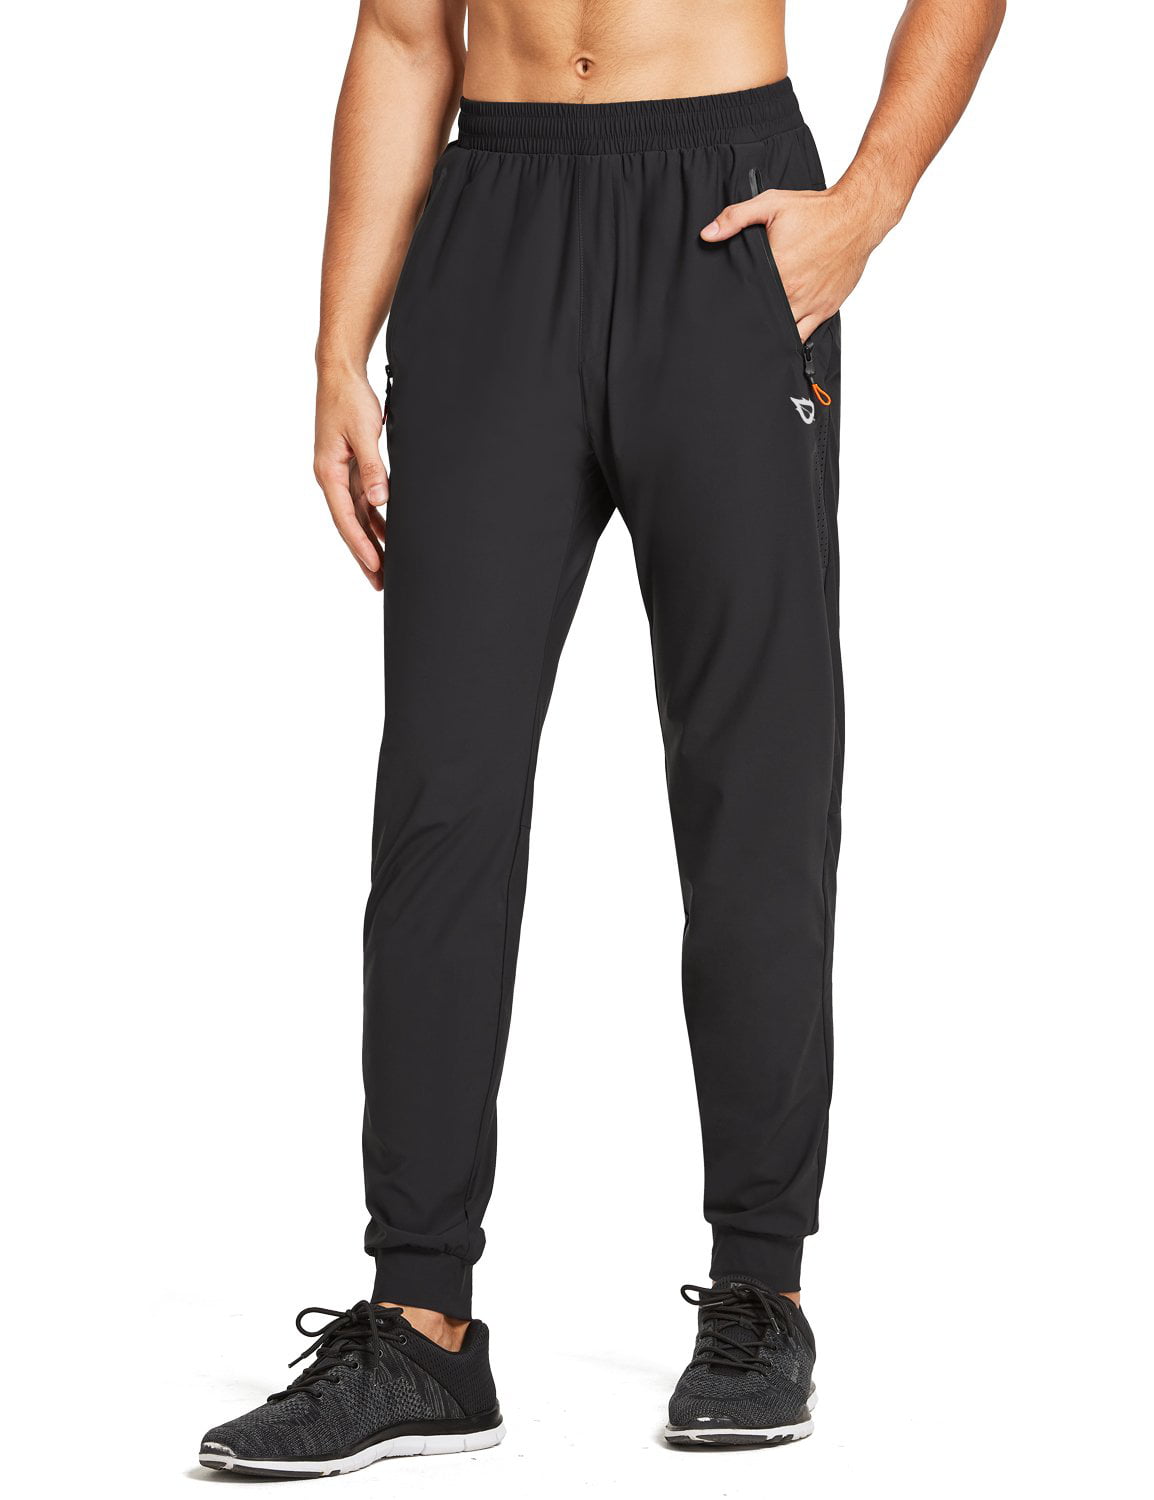 BALEAF Mens Running Pants Workout Training Jogger Lightweight Quick Dry with Pockets